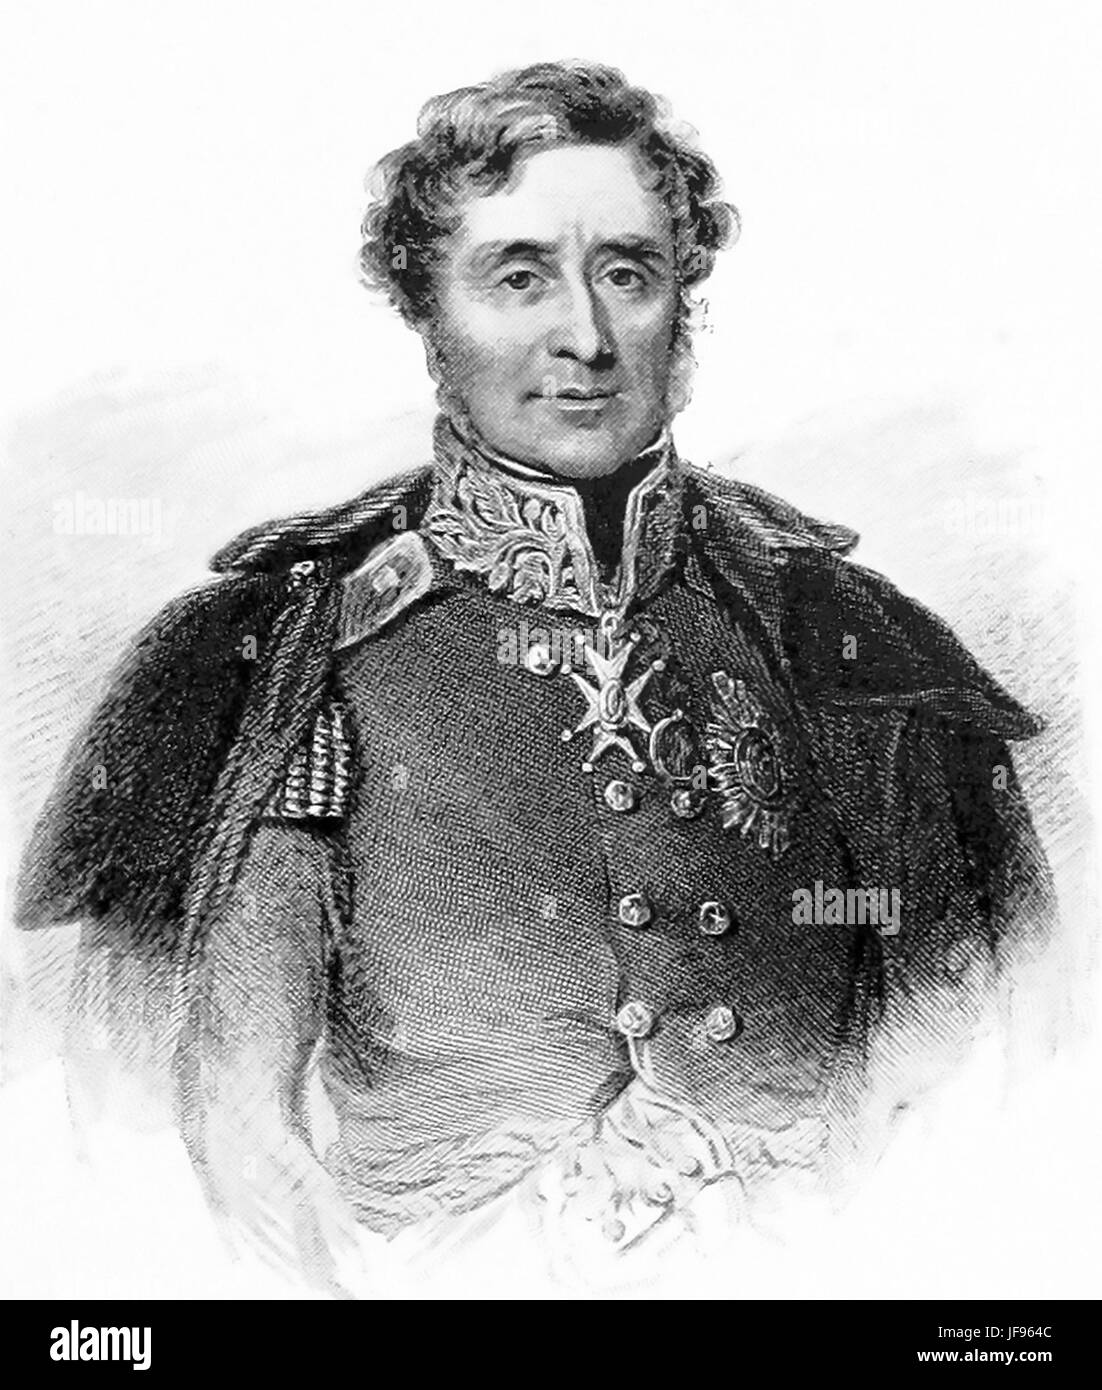 FITZROY SOMERSET, 1st Baron Raglan (1788-1855) British Army officer whose imprecise orders lead to the Charge of the Light Brigade Stock Photo